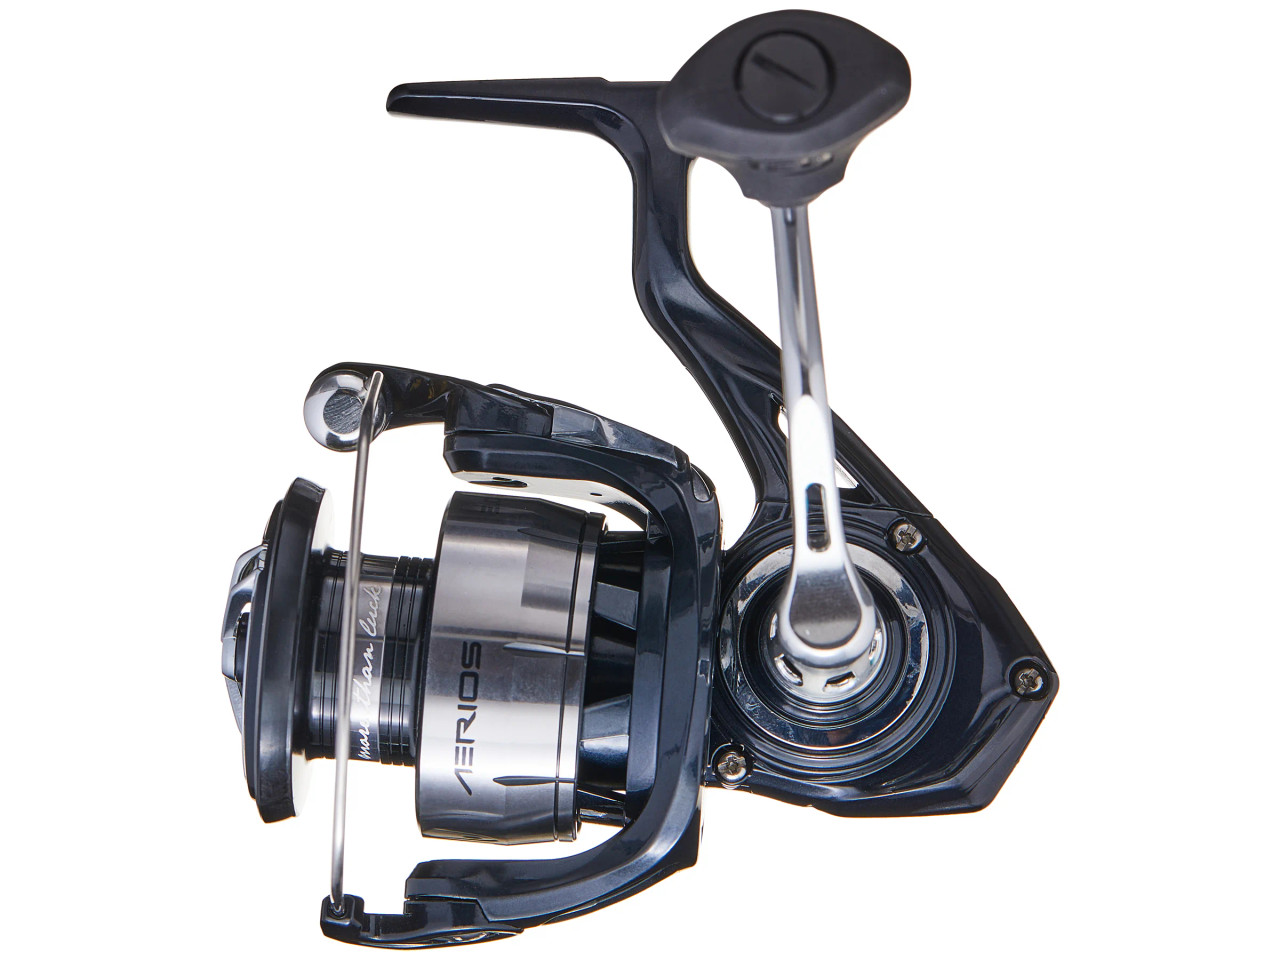 13 Fishing - Creed GT Spinning Reel - 6.2:1 - 2000